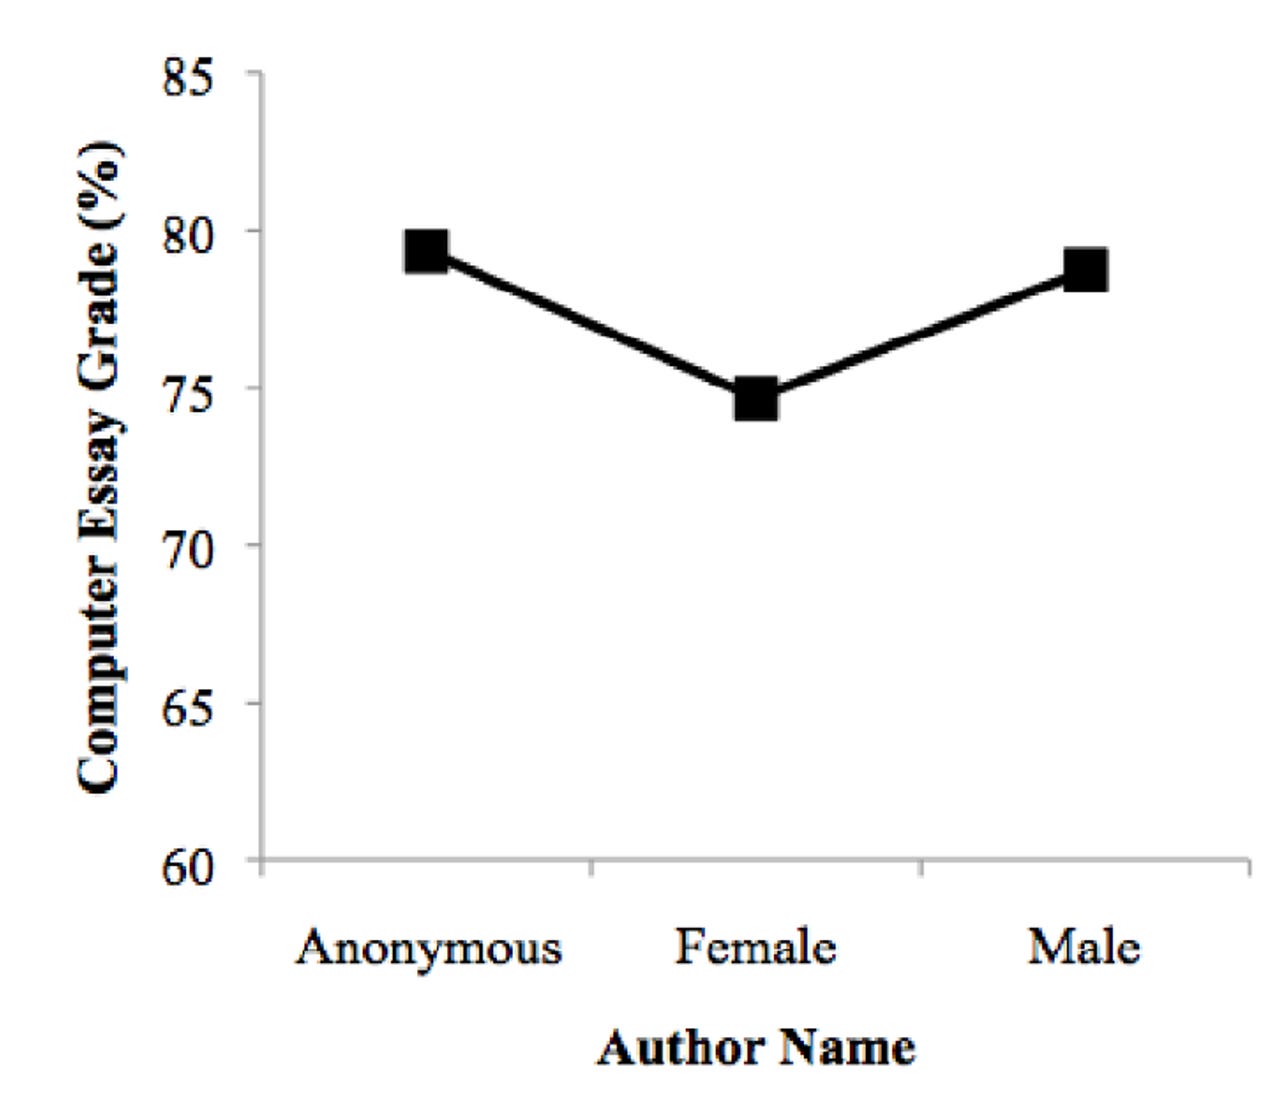 A graph with “Computer Essay Grade Percent” on the Y-axis and Author Name (Anonymous, Female, or Male) on the x-axis, essay grades with female names are 5% lower than essays with anonymous or a male name.